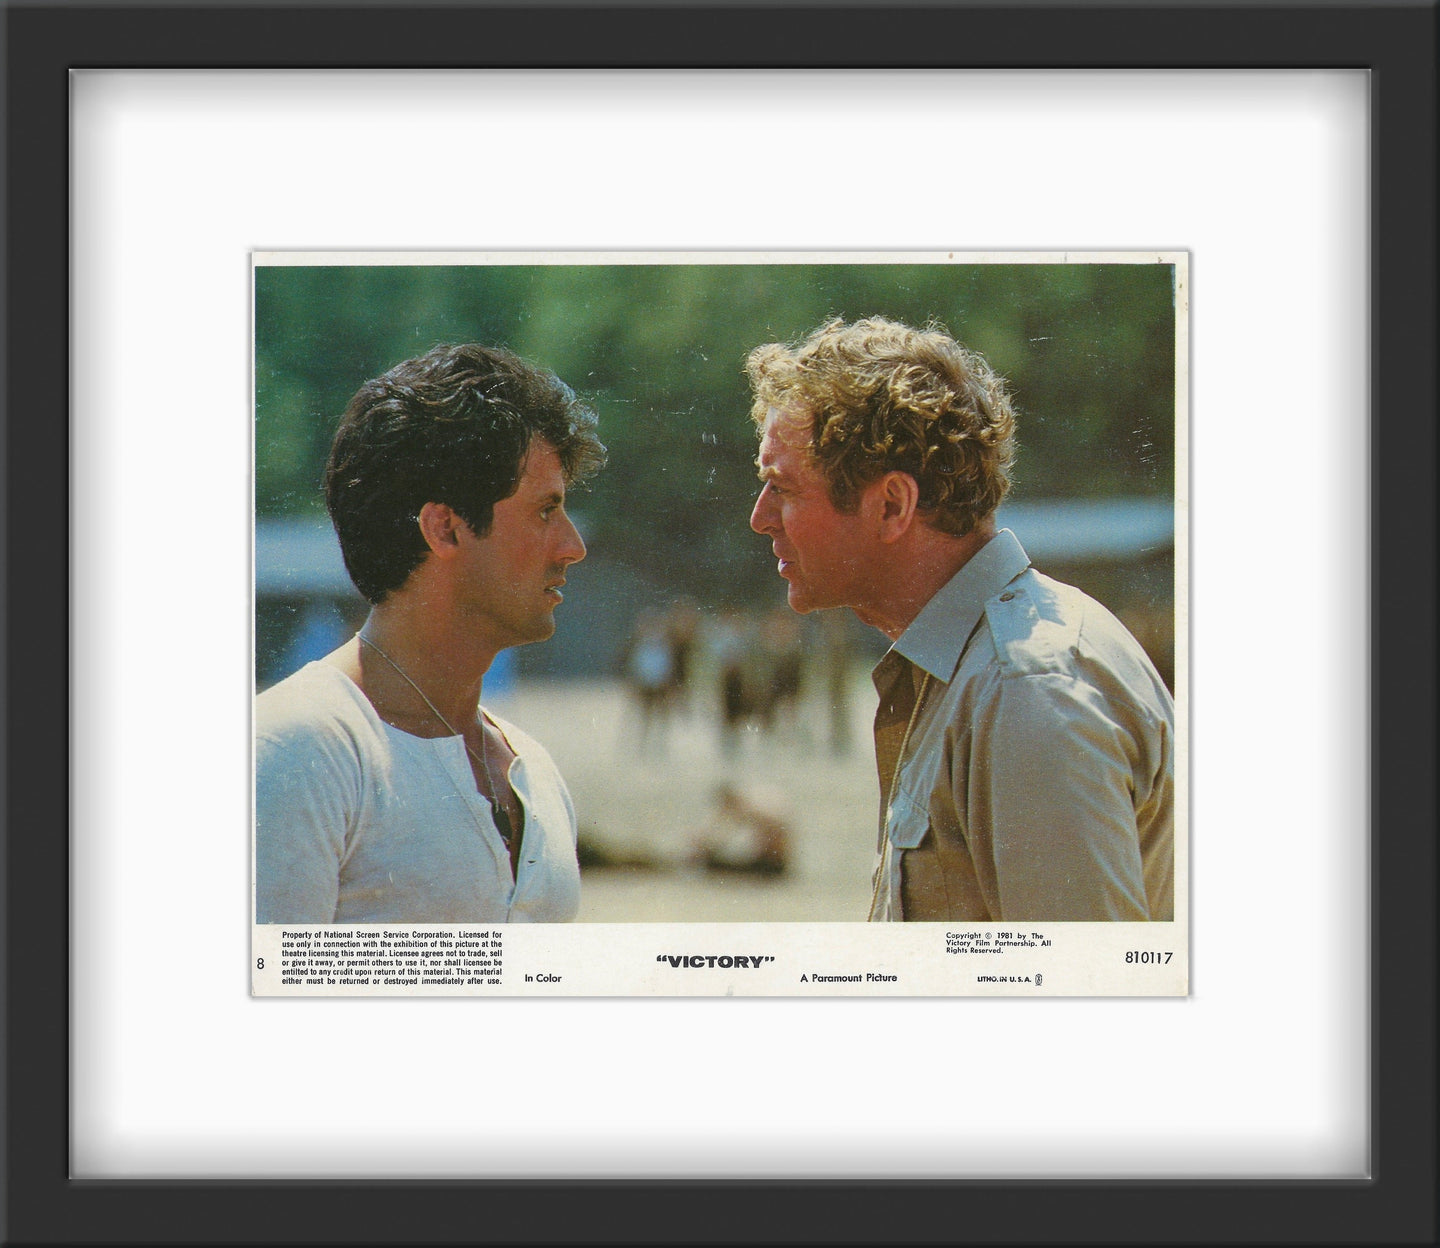 An original lobby card for the film Escape To Victory